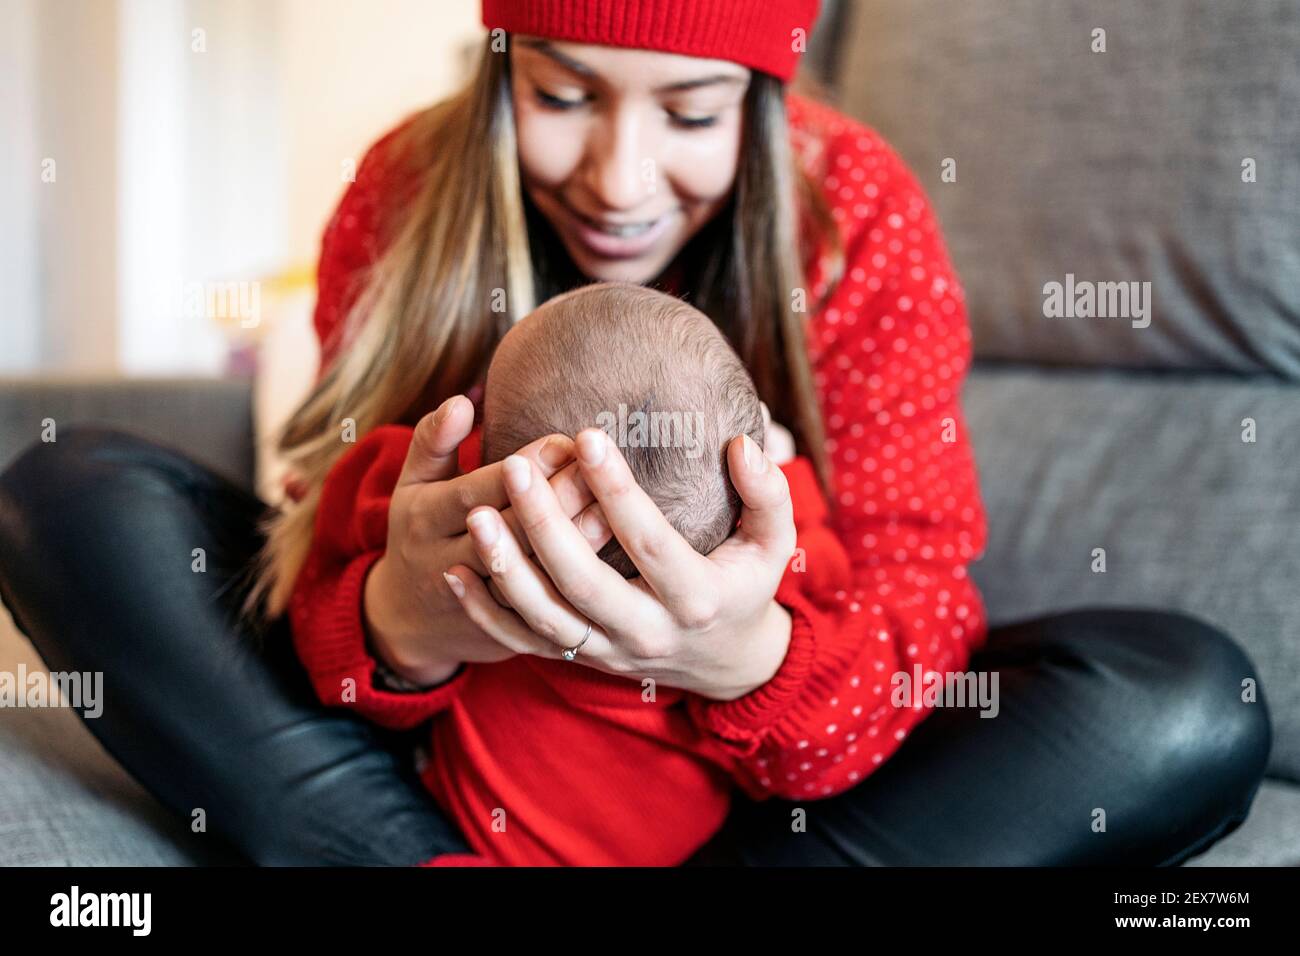 Stock photo of adorable mother holding her baby in the couch. Stock Photo